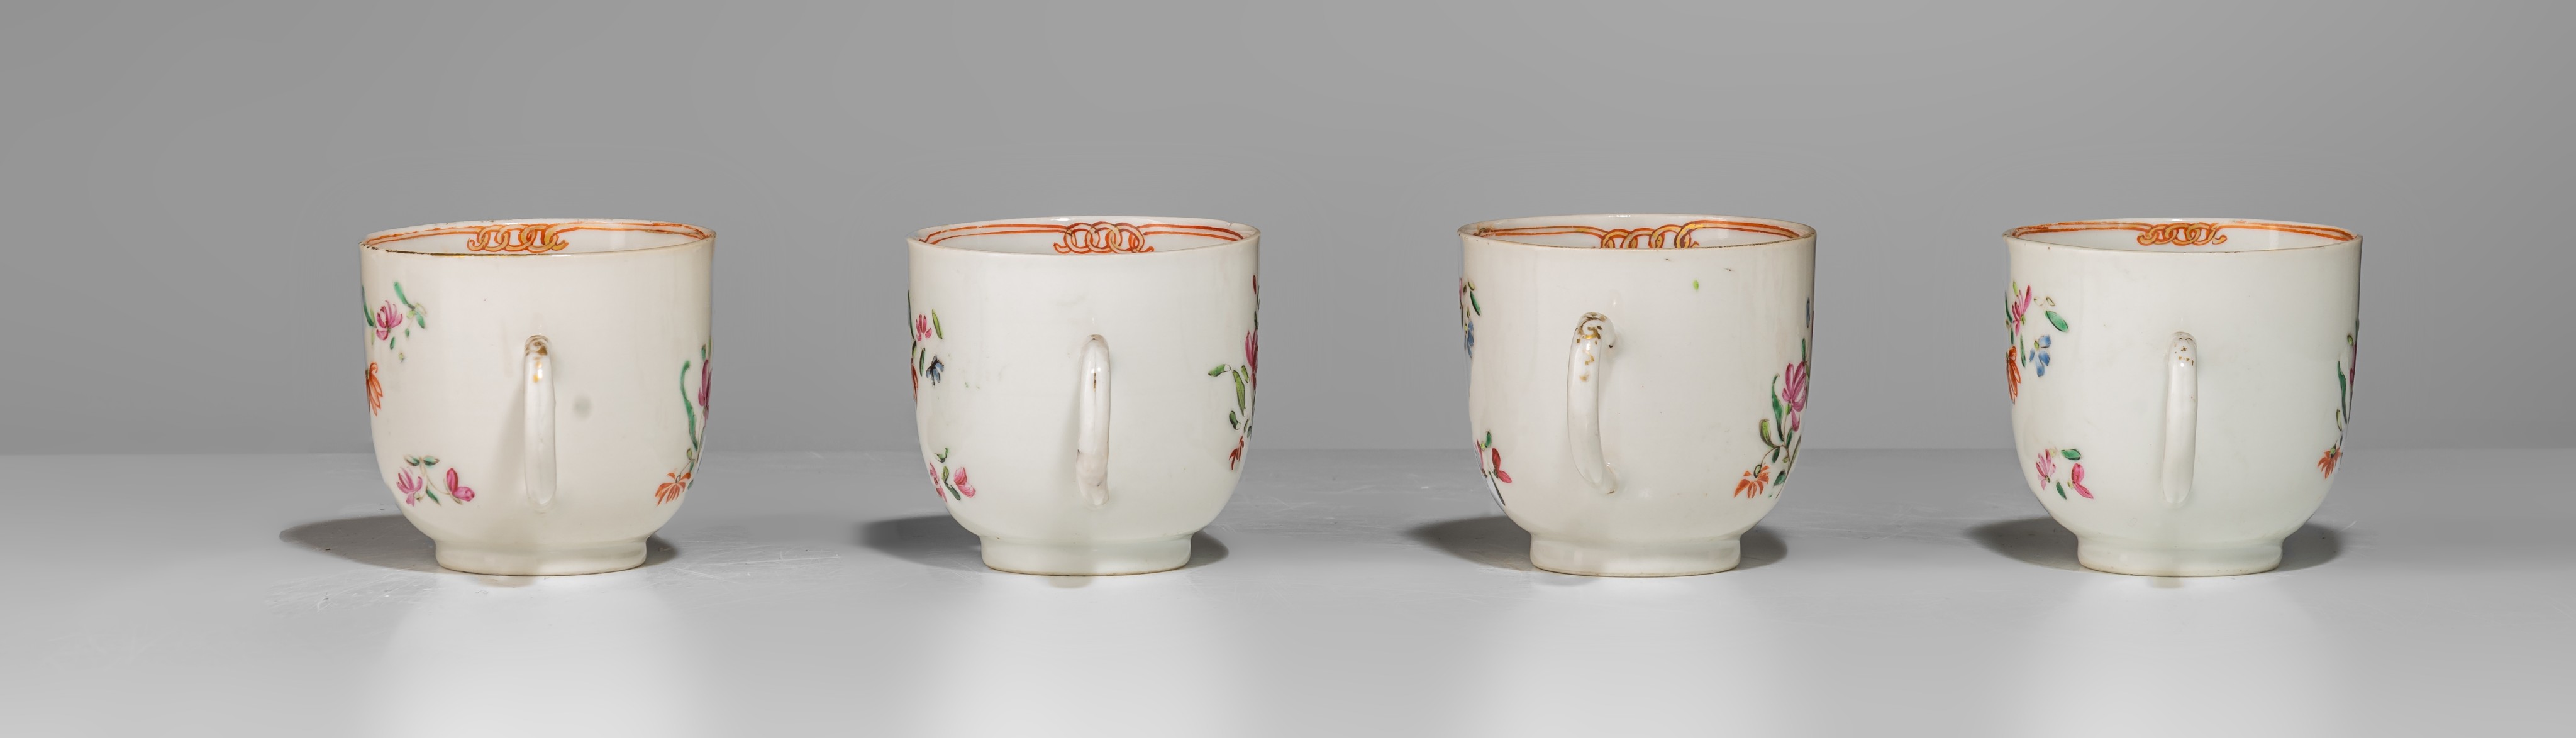 A collection of famille rose and gilt decorated export porcelain ware, 18thC, largest - H 12,5 - 34, - Image 18 of 20